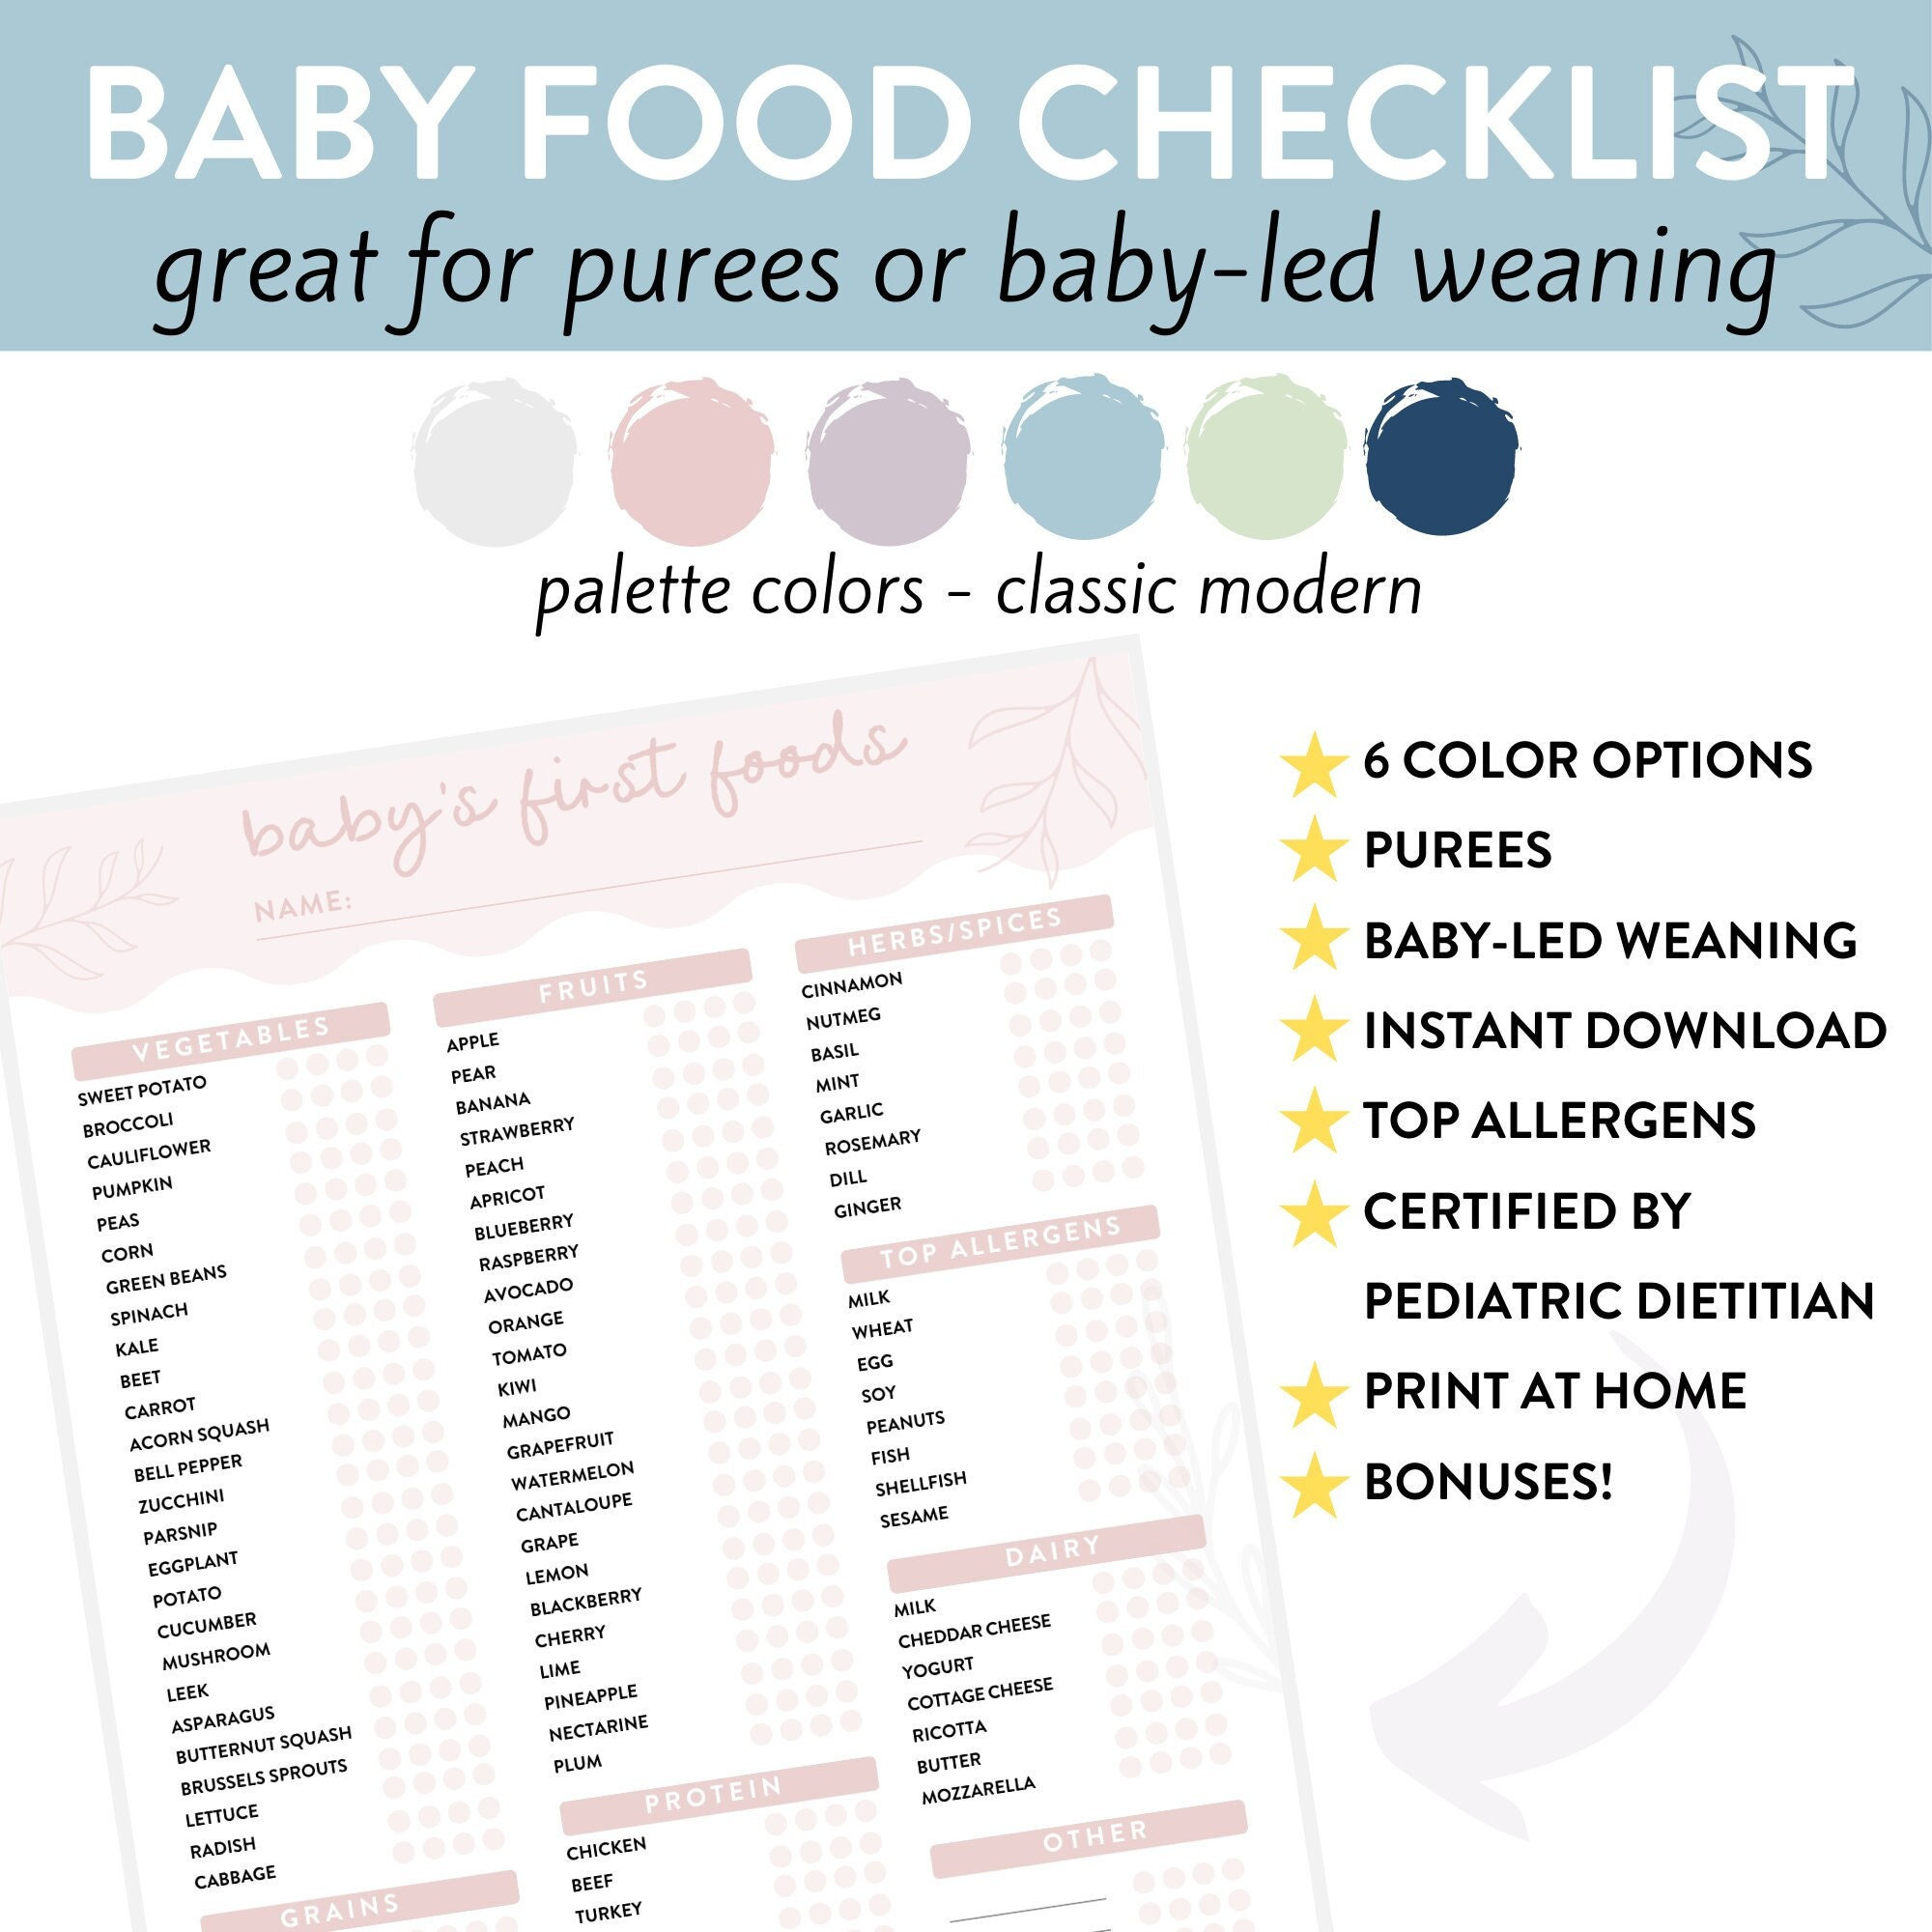 Weaning Essentials Checklist: 9 Things You Need to Wean Your Baby